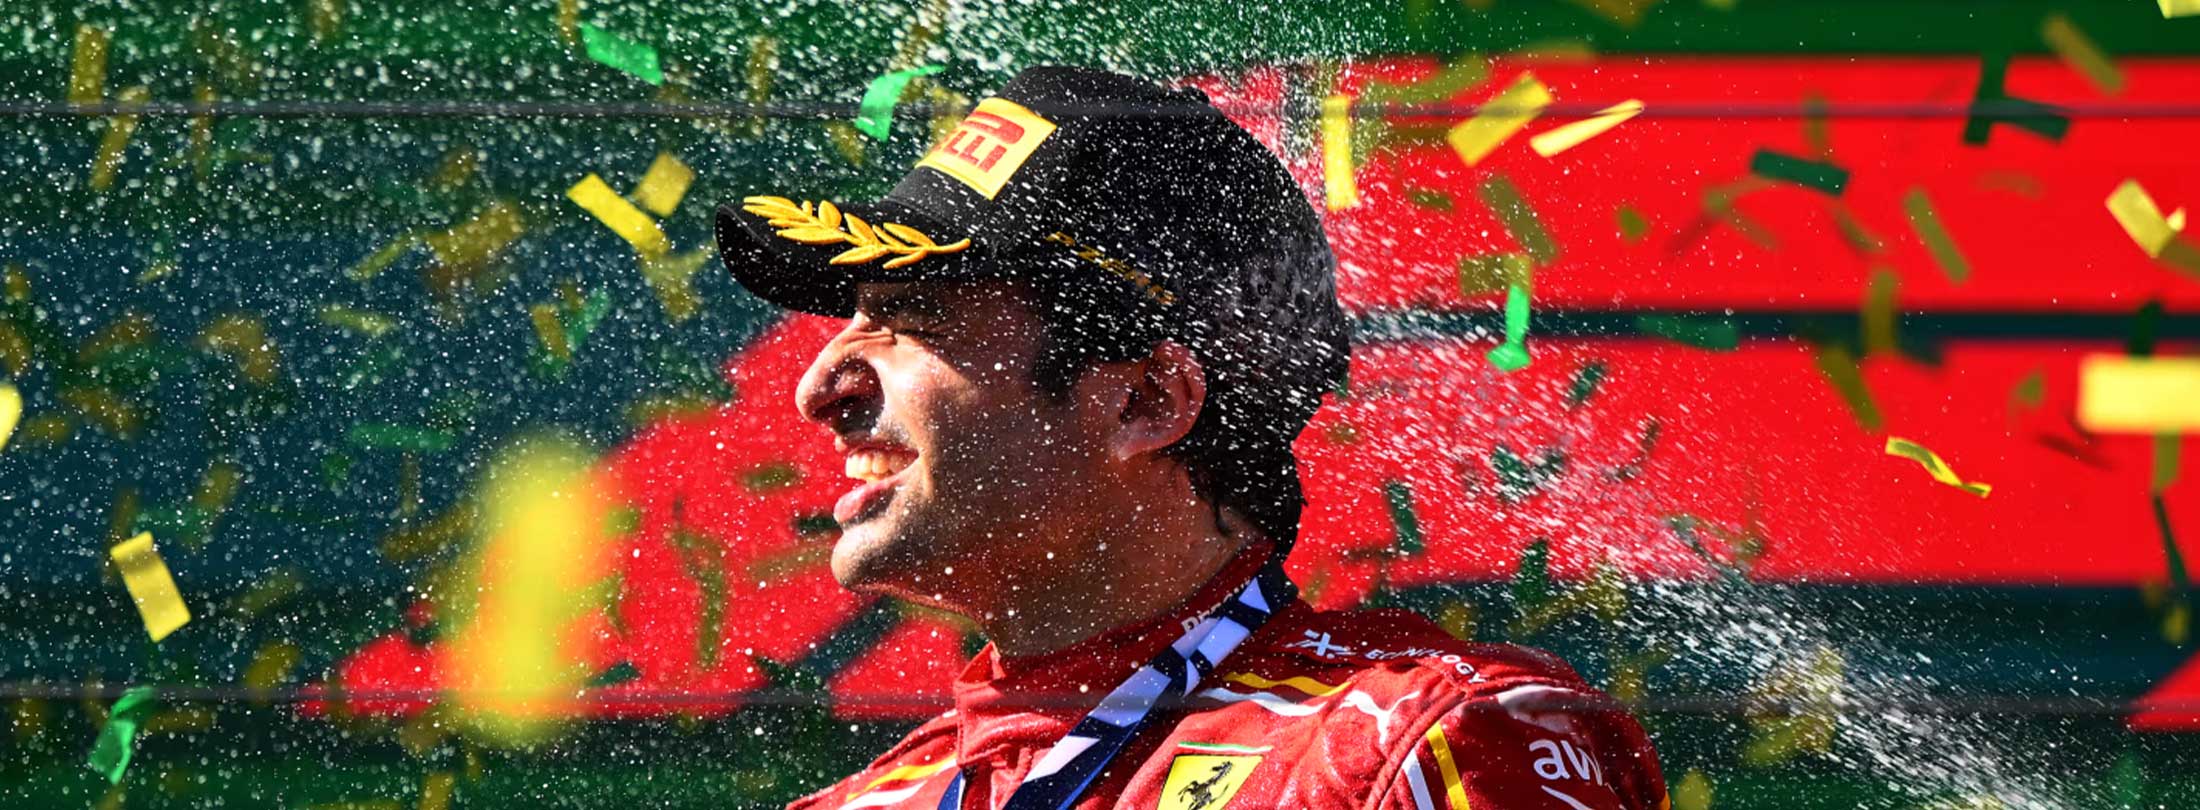 From Surgery to the Podium in Australia – Sainz WINS!